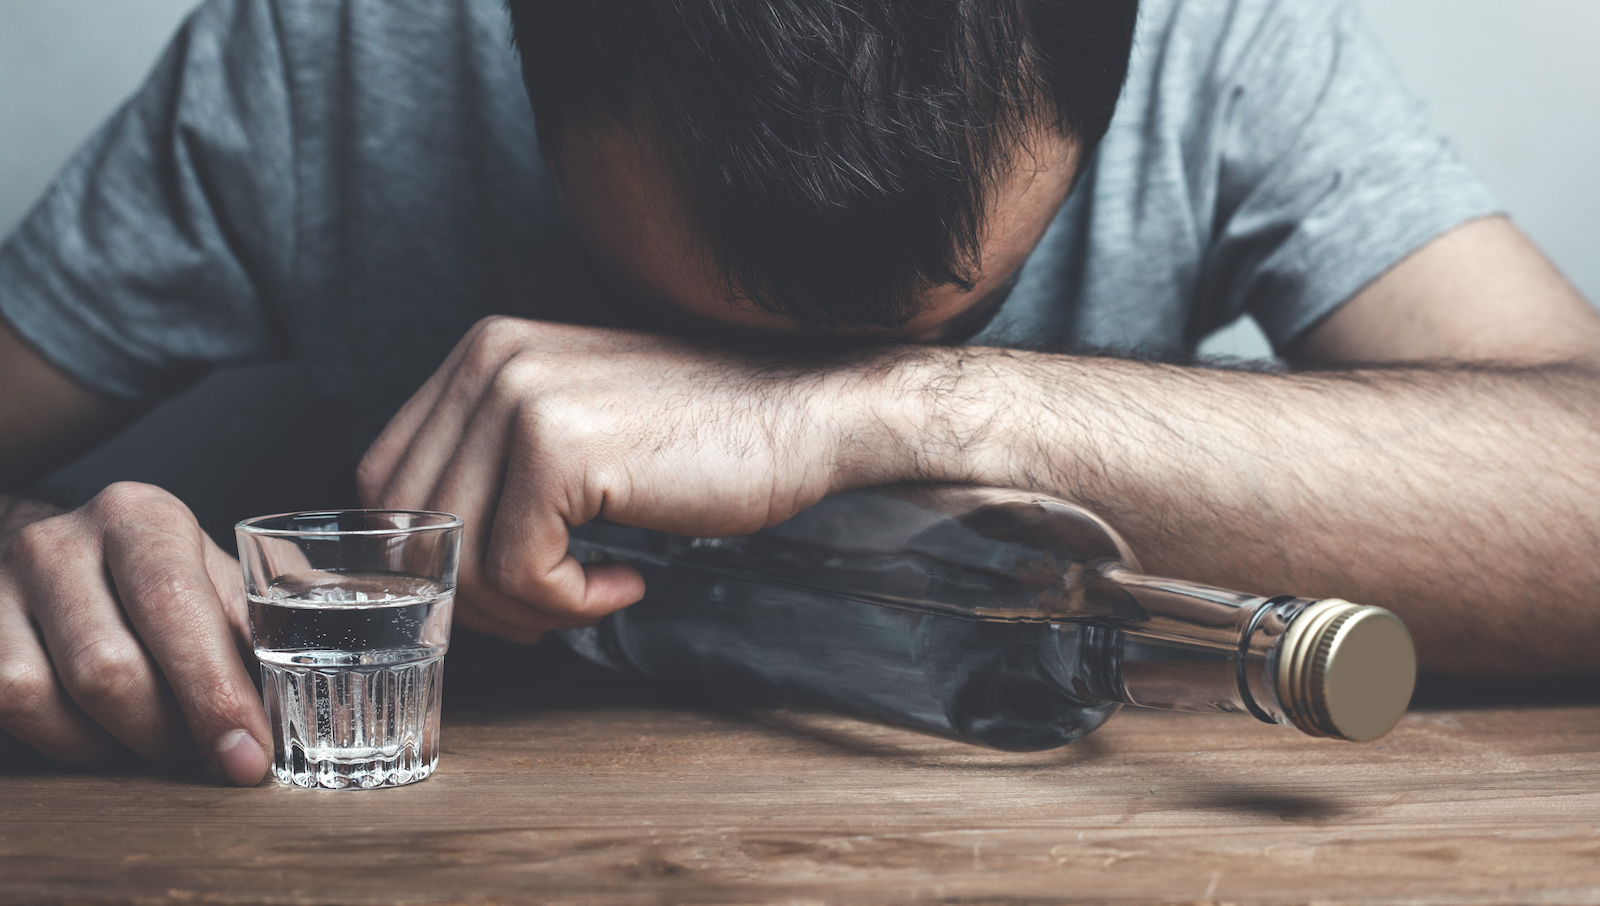 Warning Signs Of High-Functioning Alcoholism & What To Do To Stop Alcoholism In Its Tracks